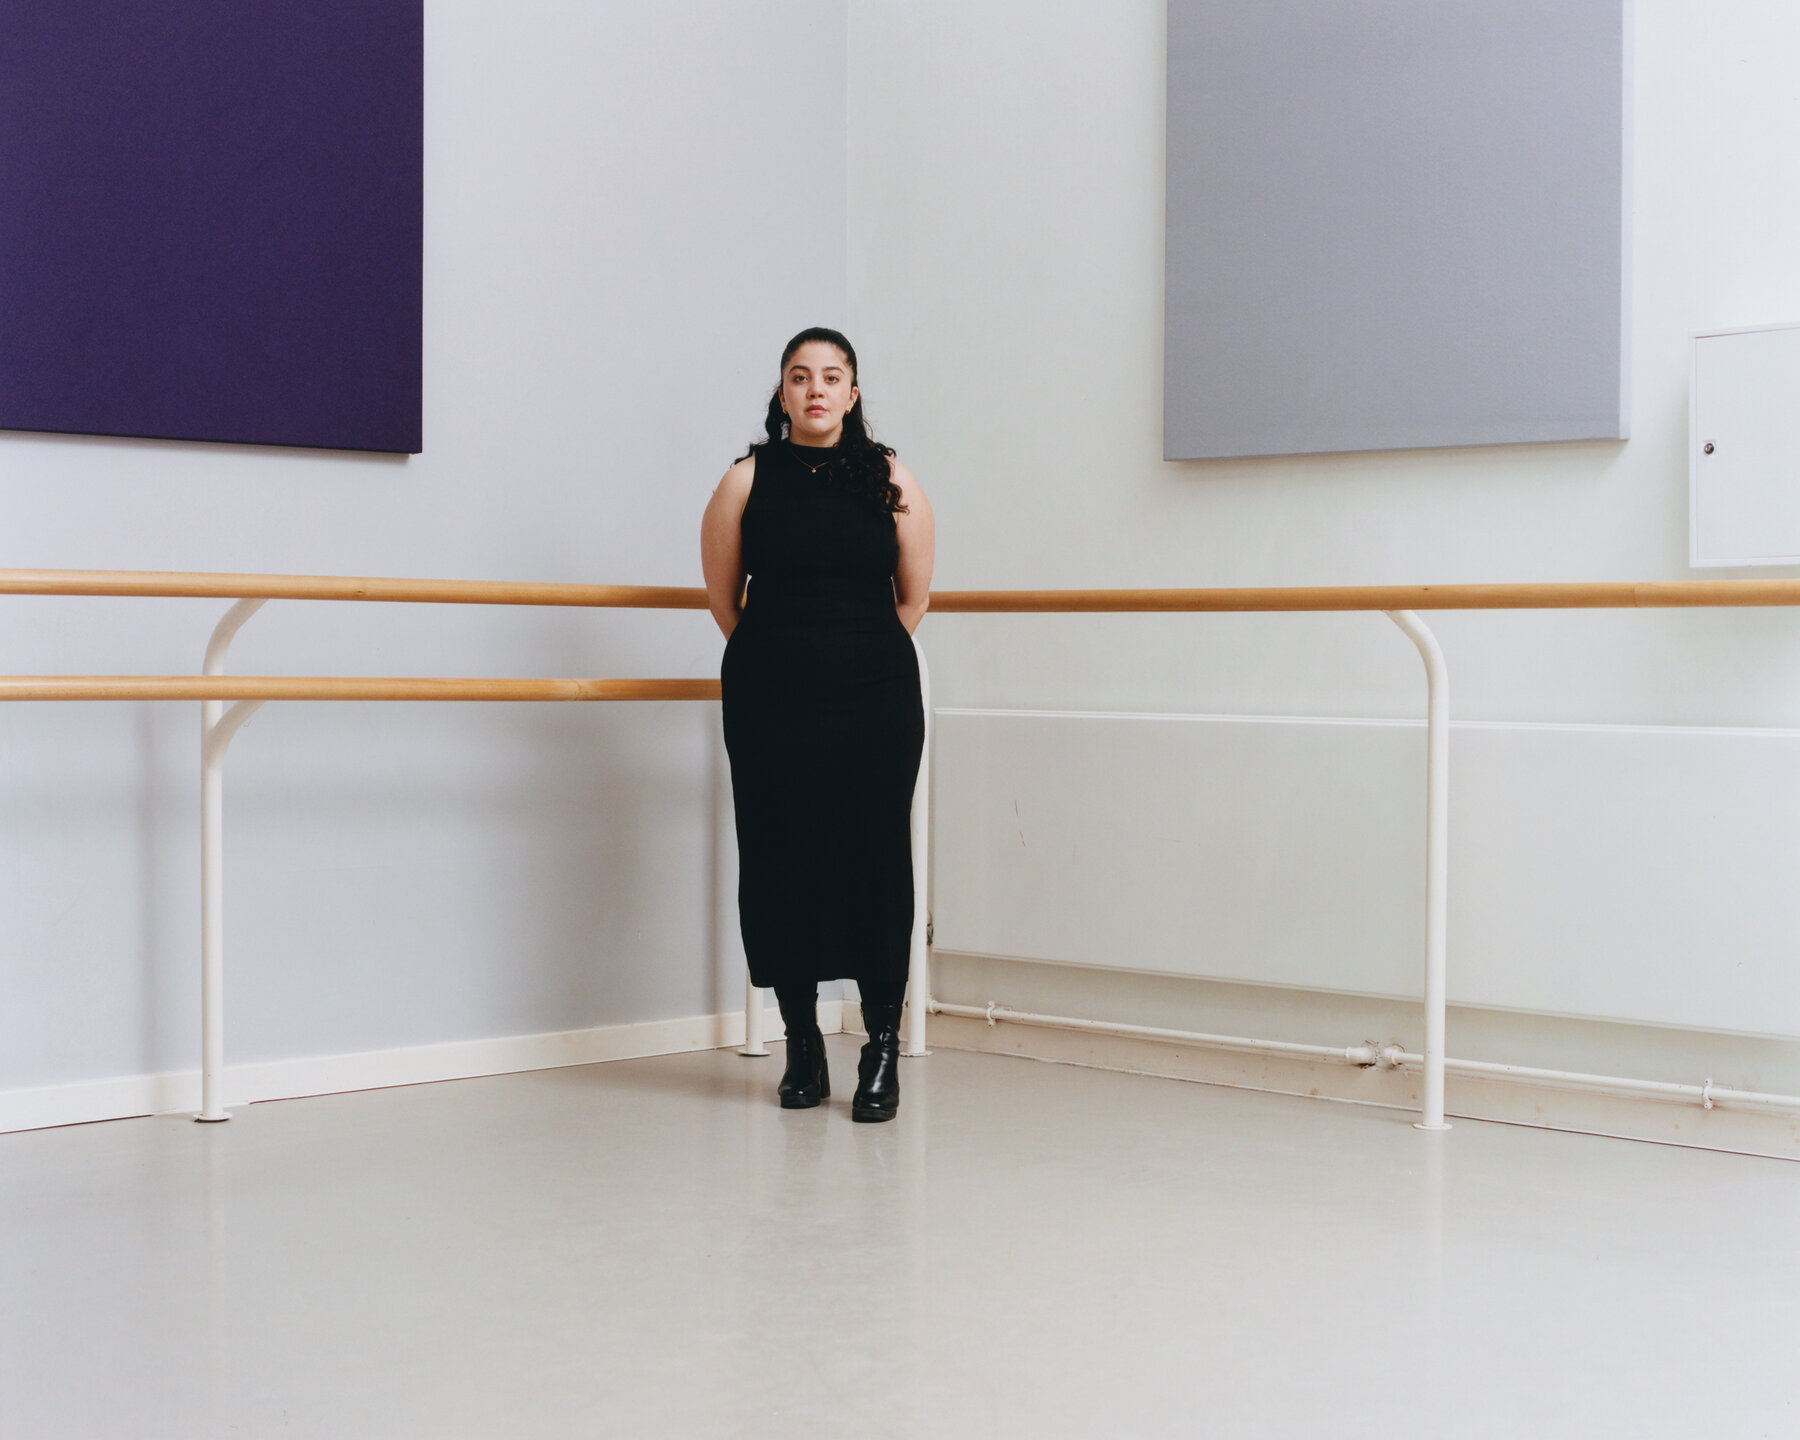 Arielle Smith stands with her hands behind her back in the corner of a dance studio.